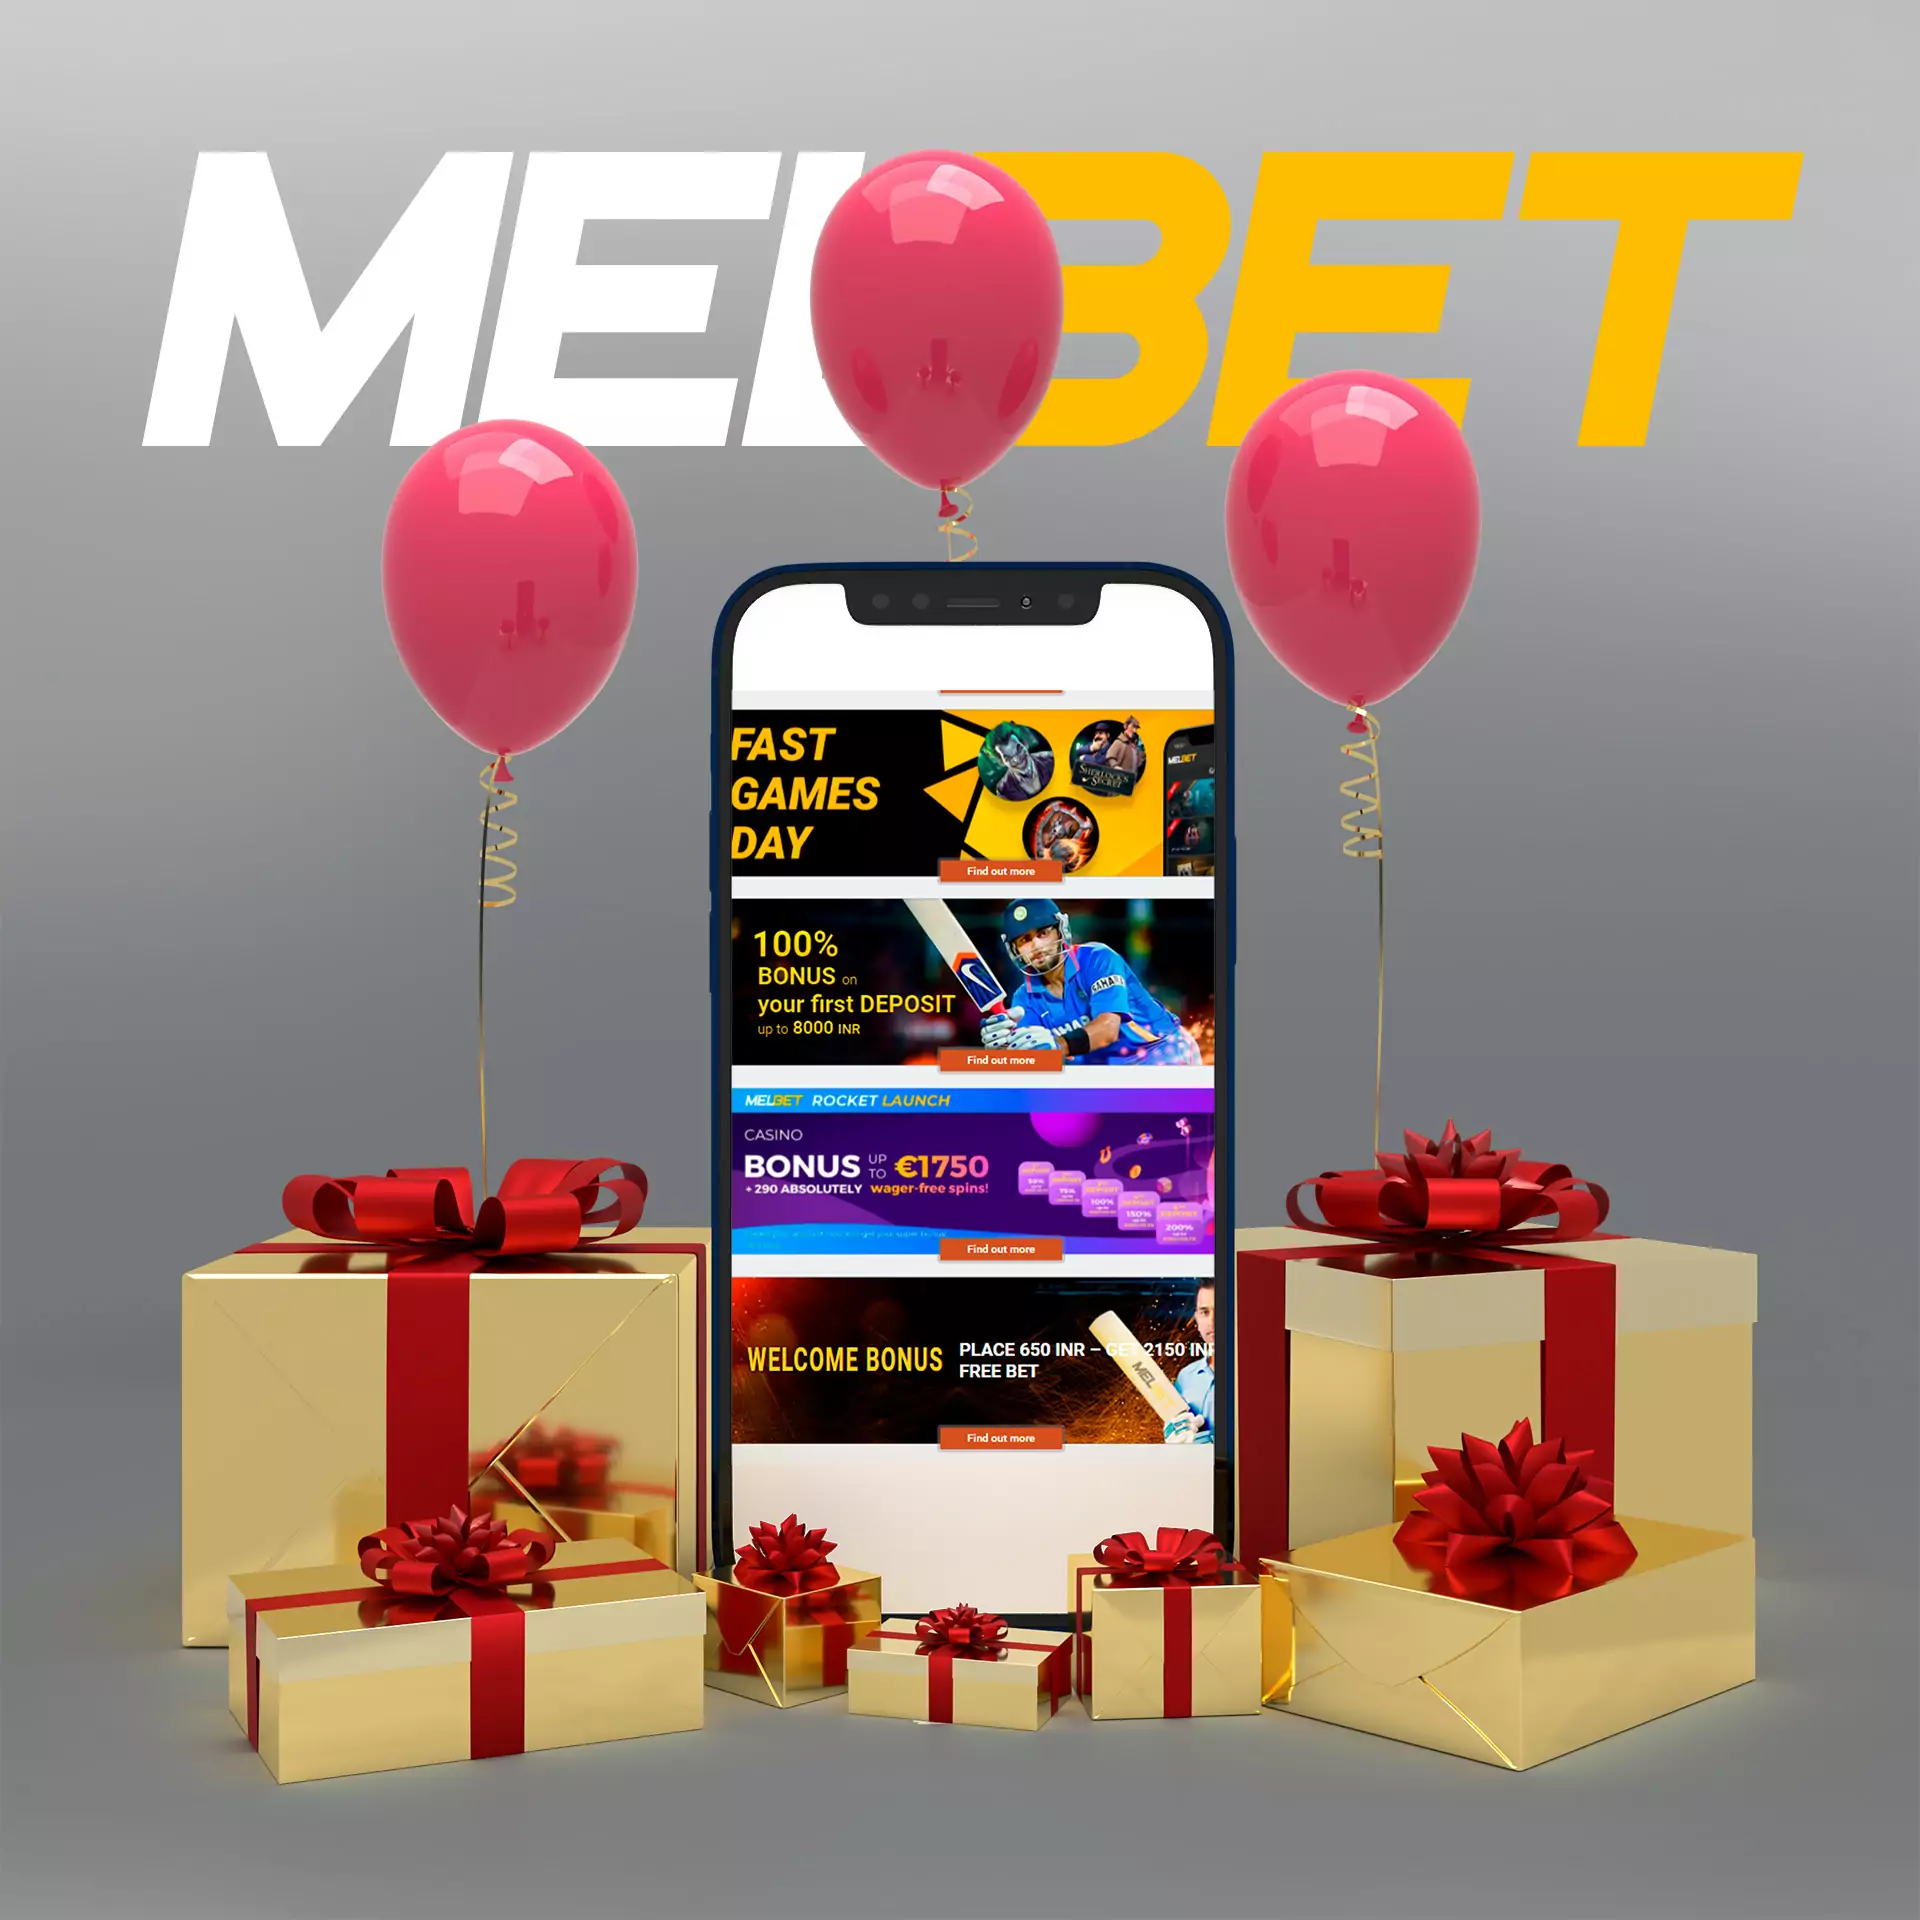 Sign up for Melbet via mobile app and gets bonuses for betting.